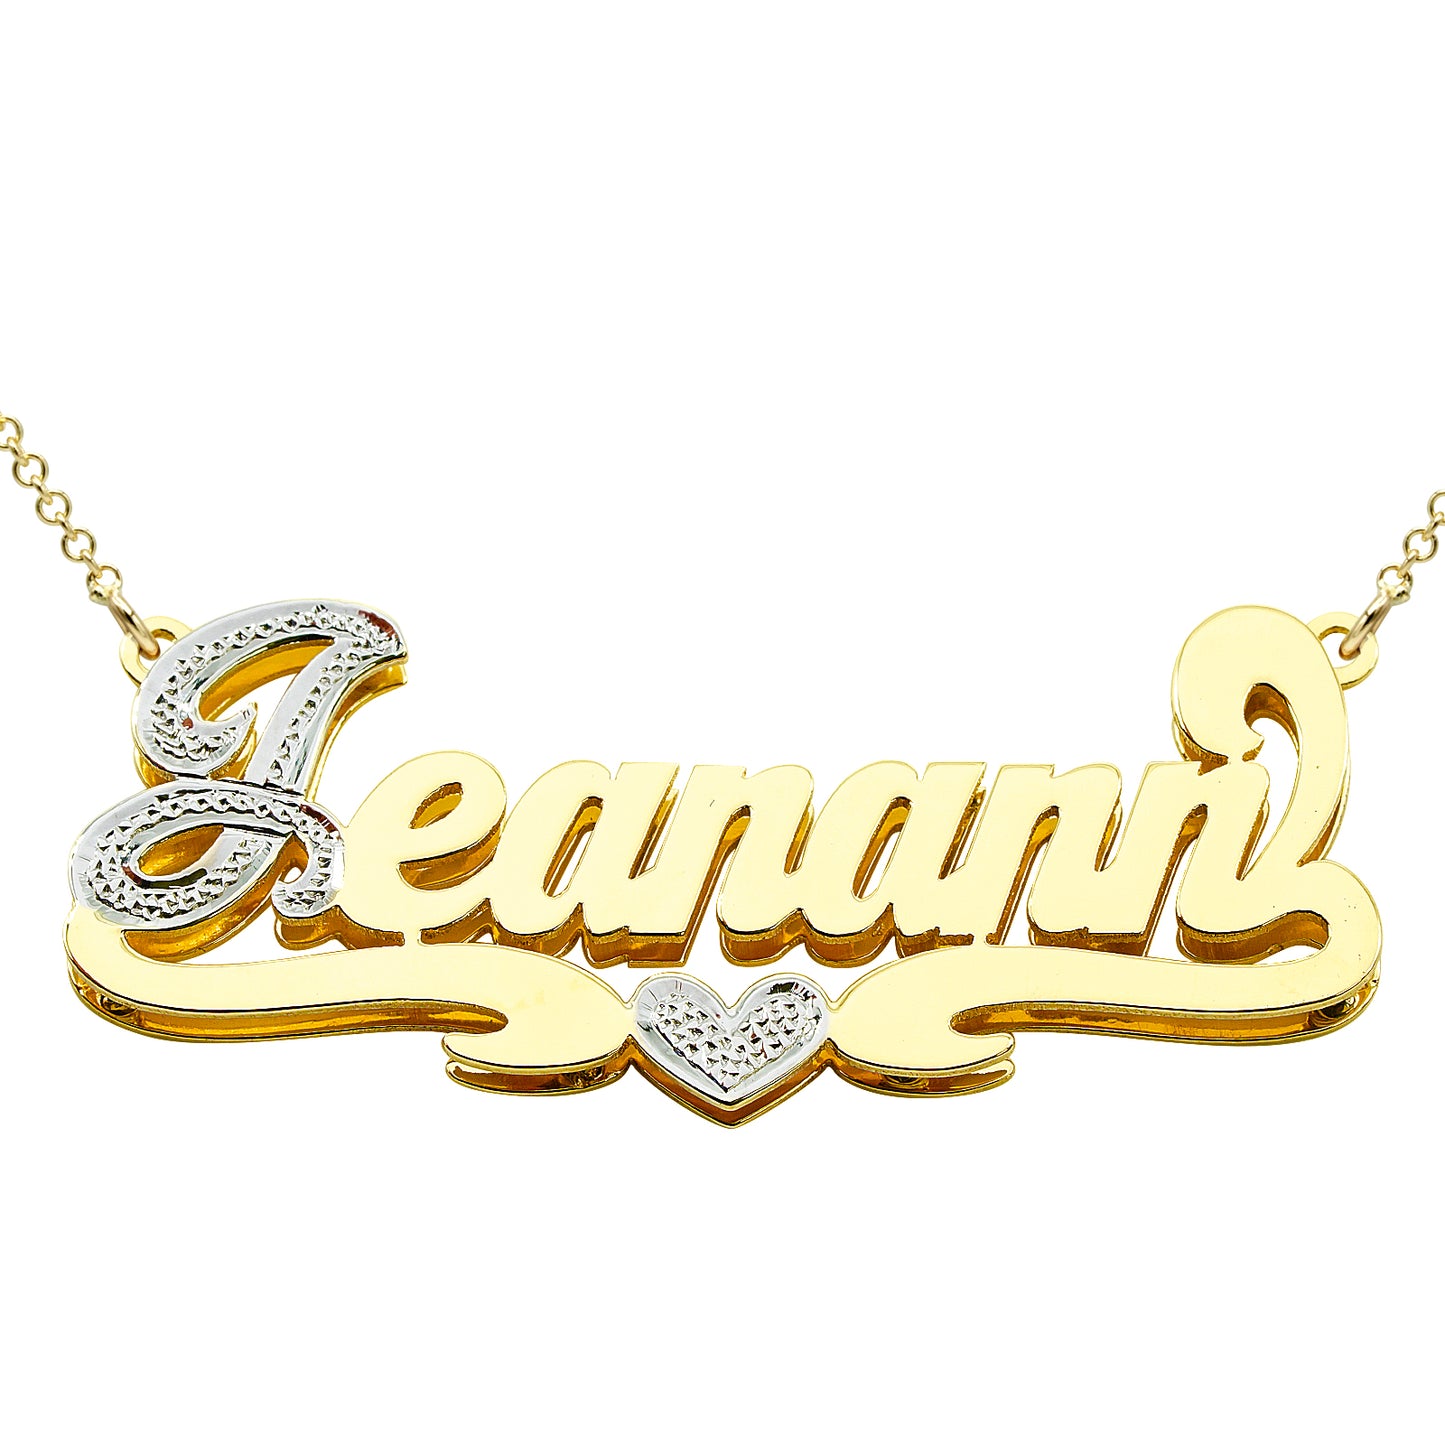 Custom 14kt. Gold Name Necklace with Diamond Sparkle!